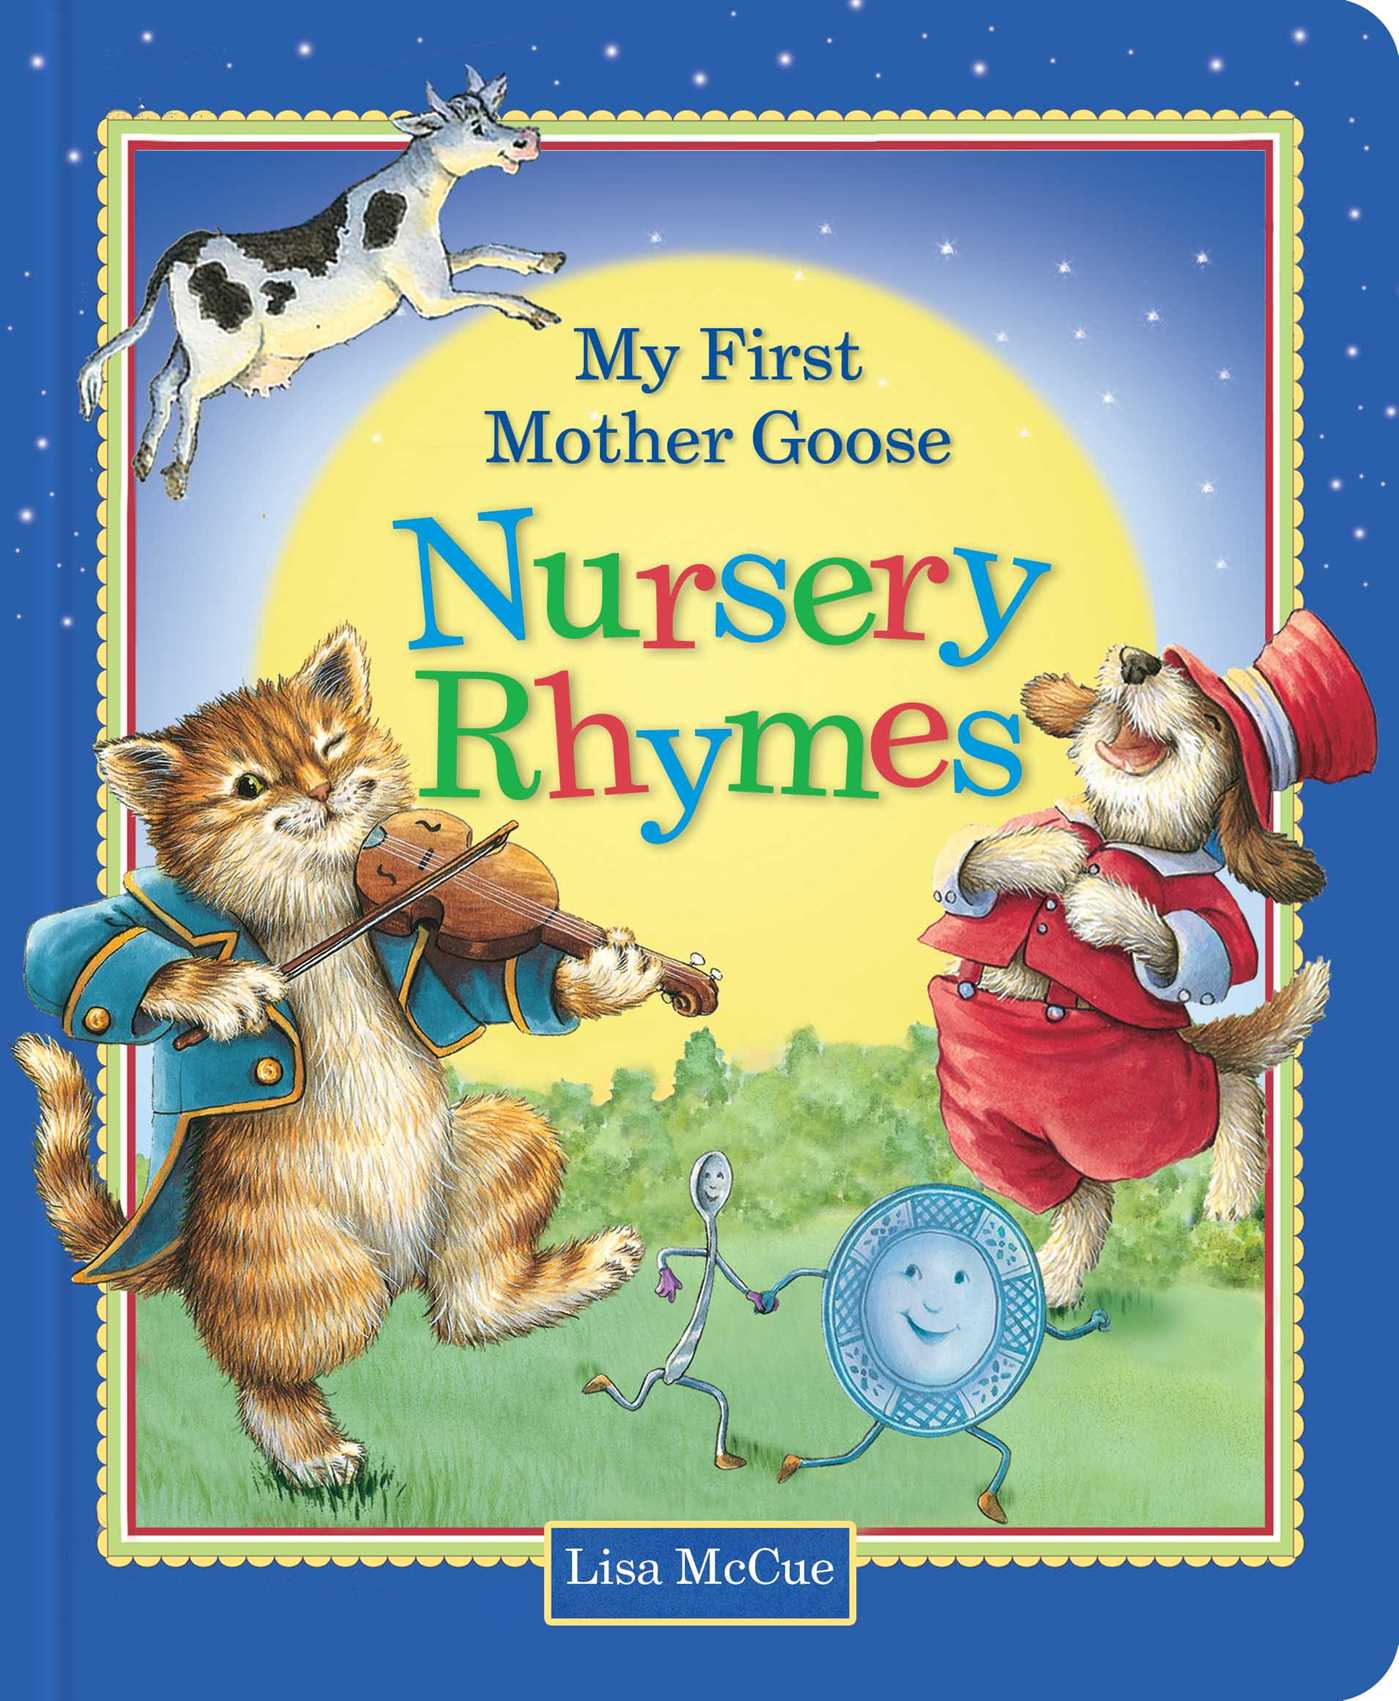 My First Mother Goose Nursery Rhymes (Board Book)